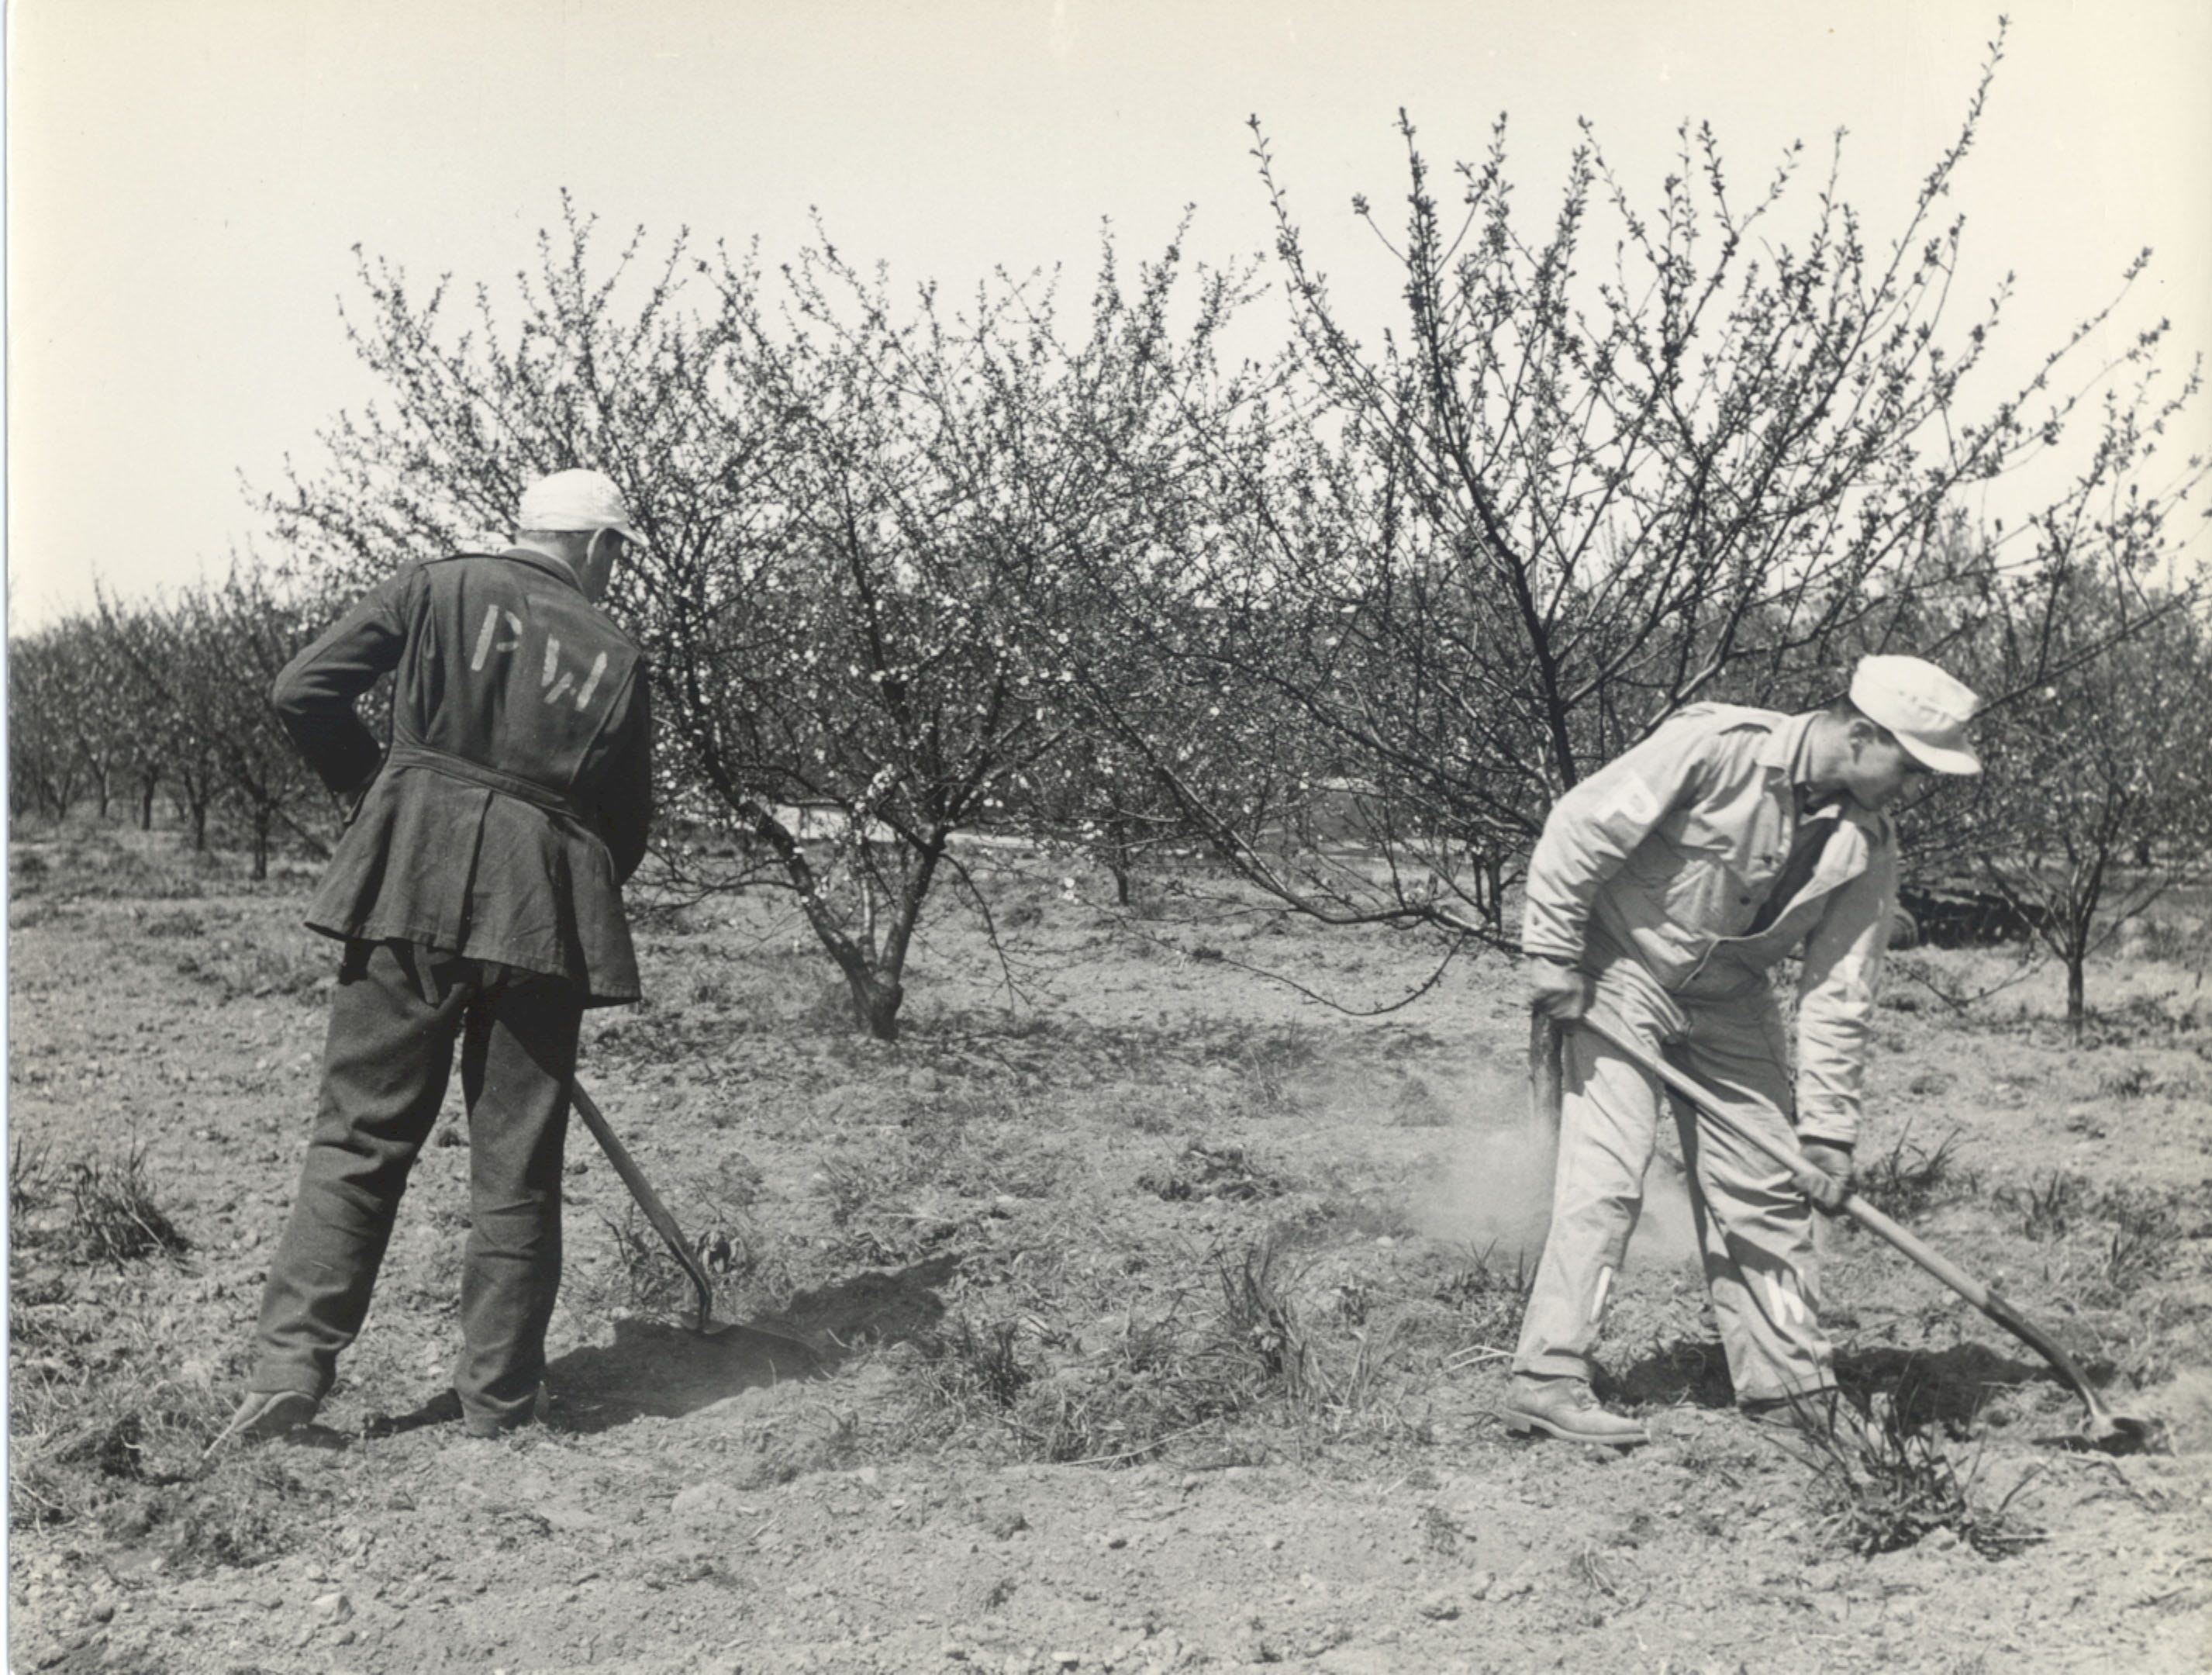 "PW" is emblazoned on the clothing of German POWs working in a Door County orchard during World War II. Prisoners worked alongside Wisconsinites to help supply food for the nation during the war years.